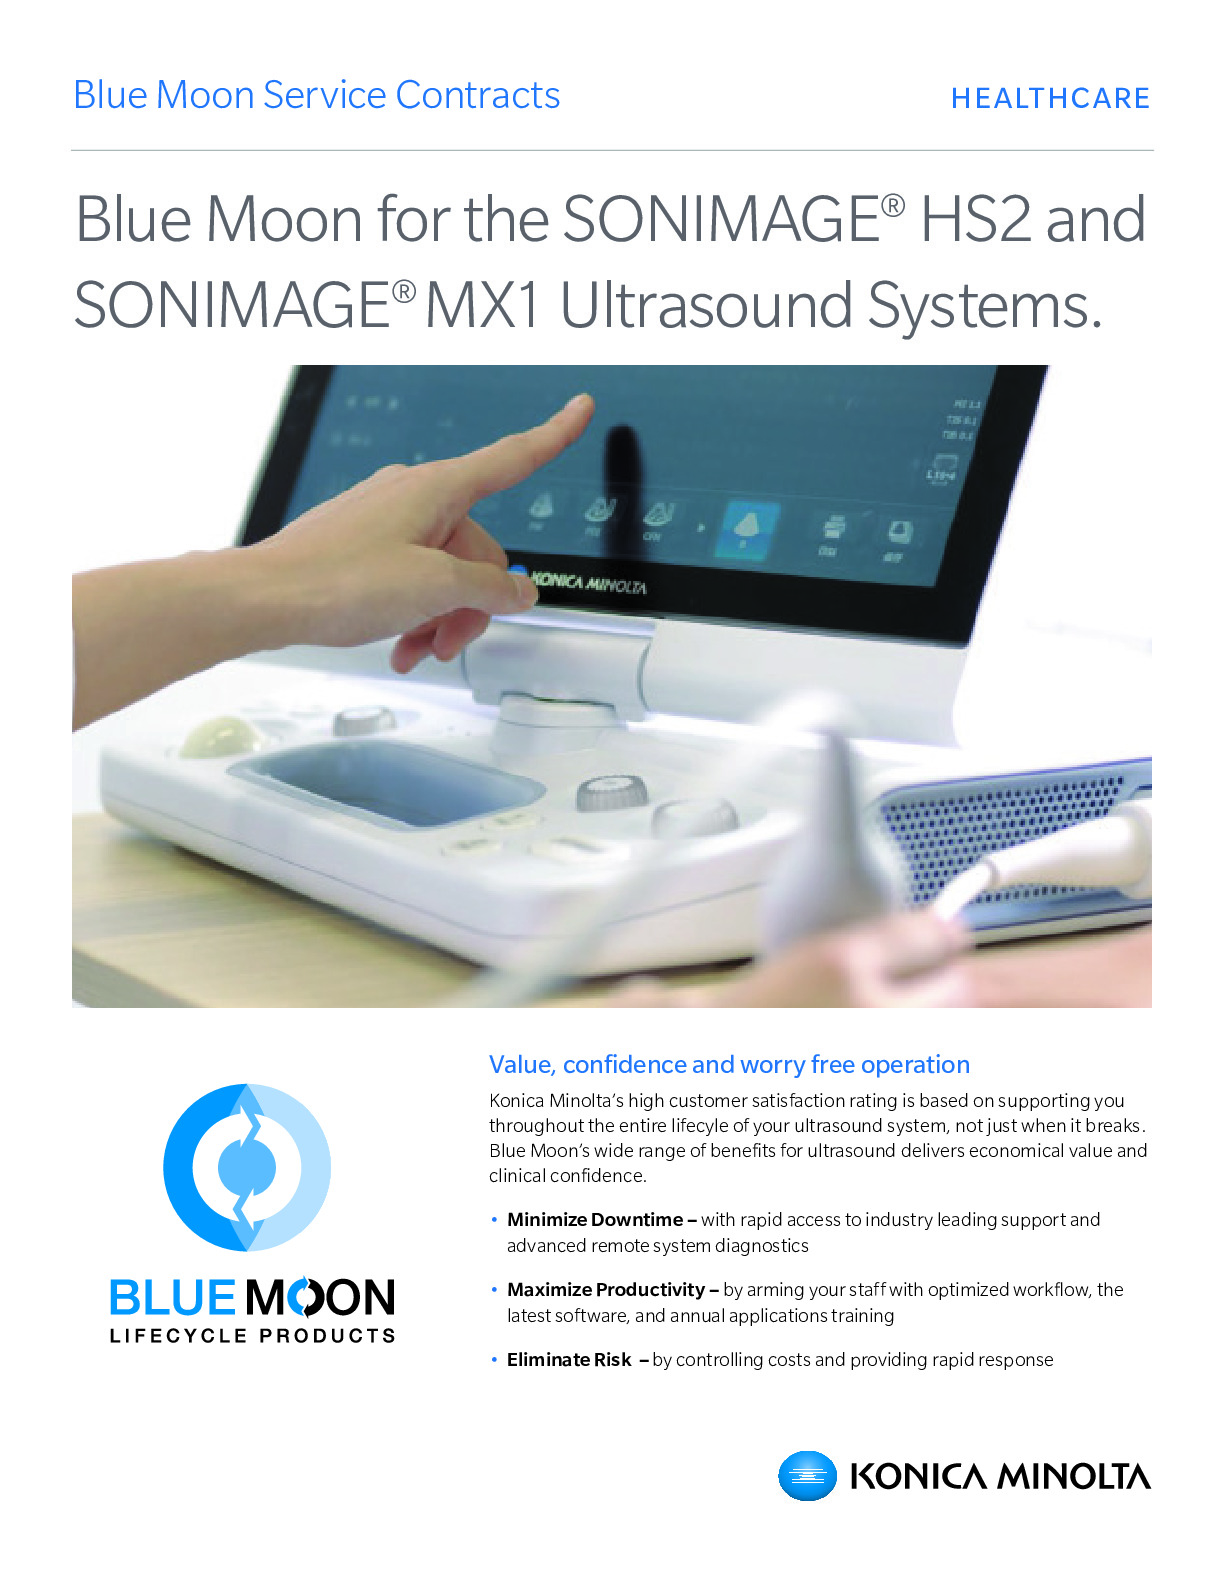 Blue Moon for HS2 and MX1 Product Sheet M1718 1020 RevA